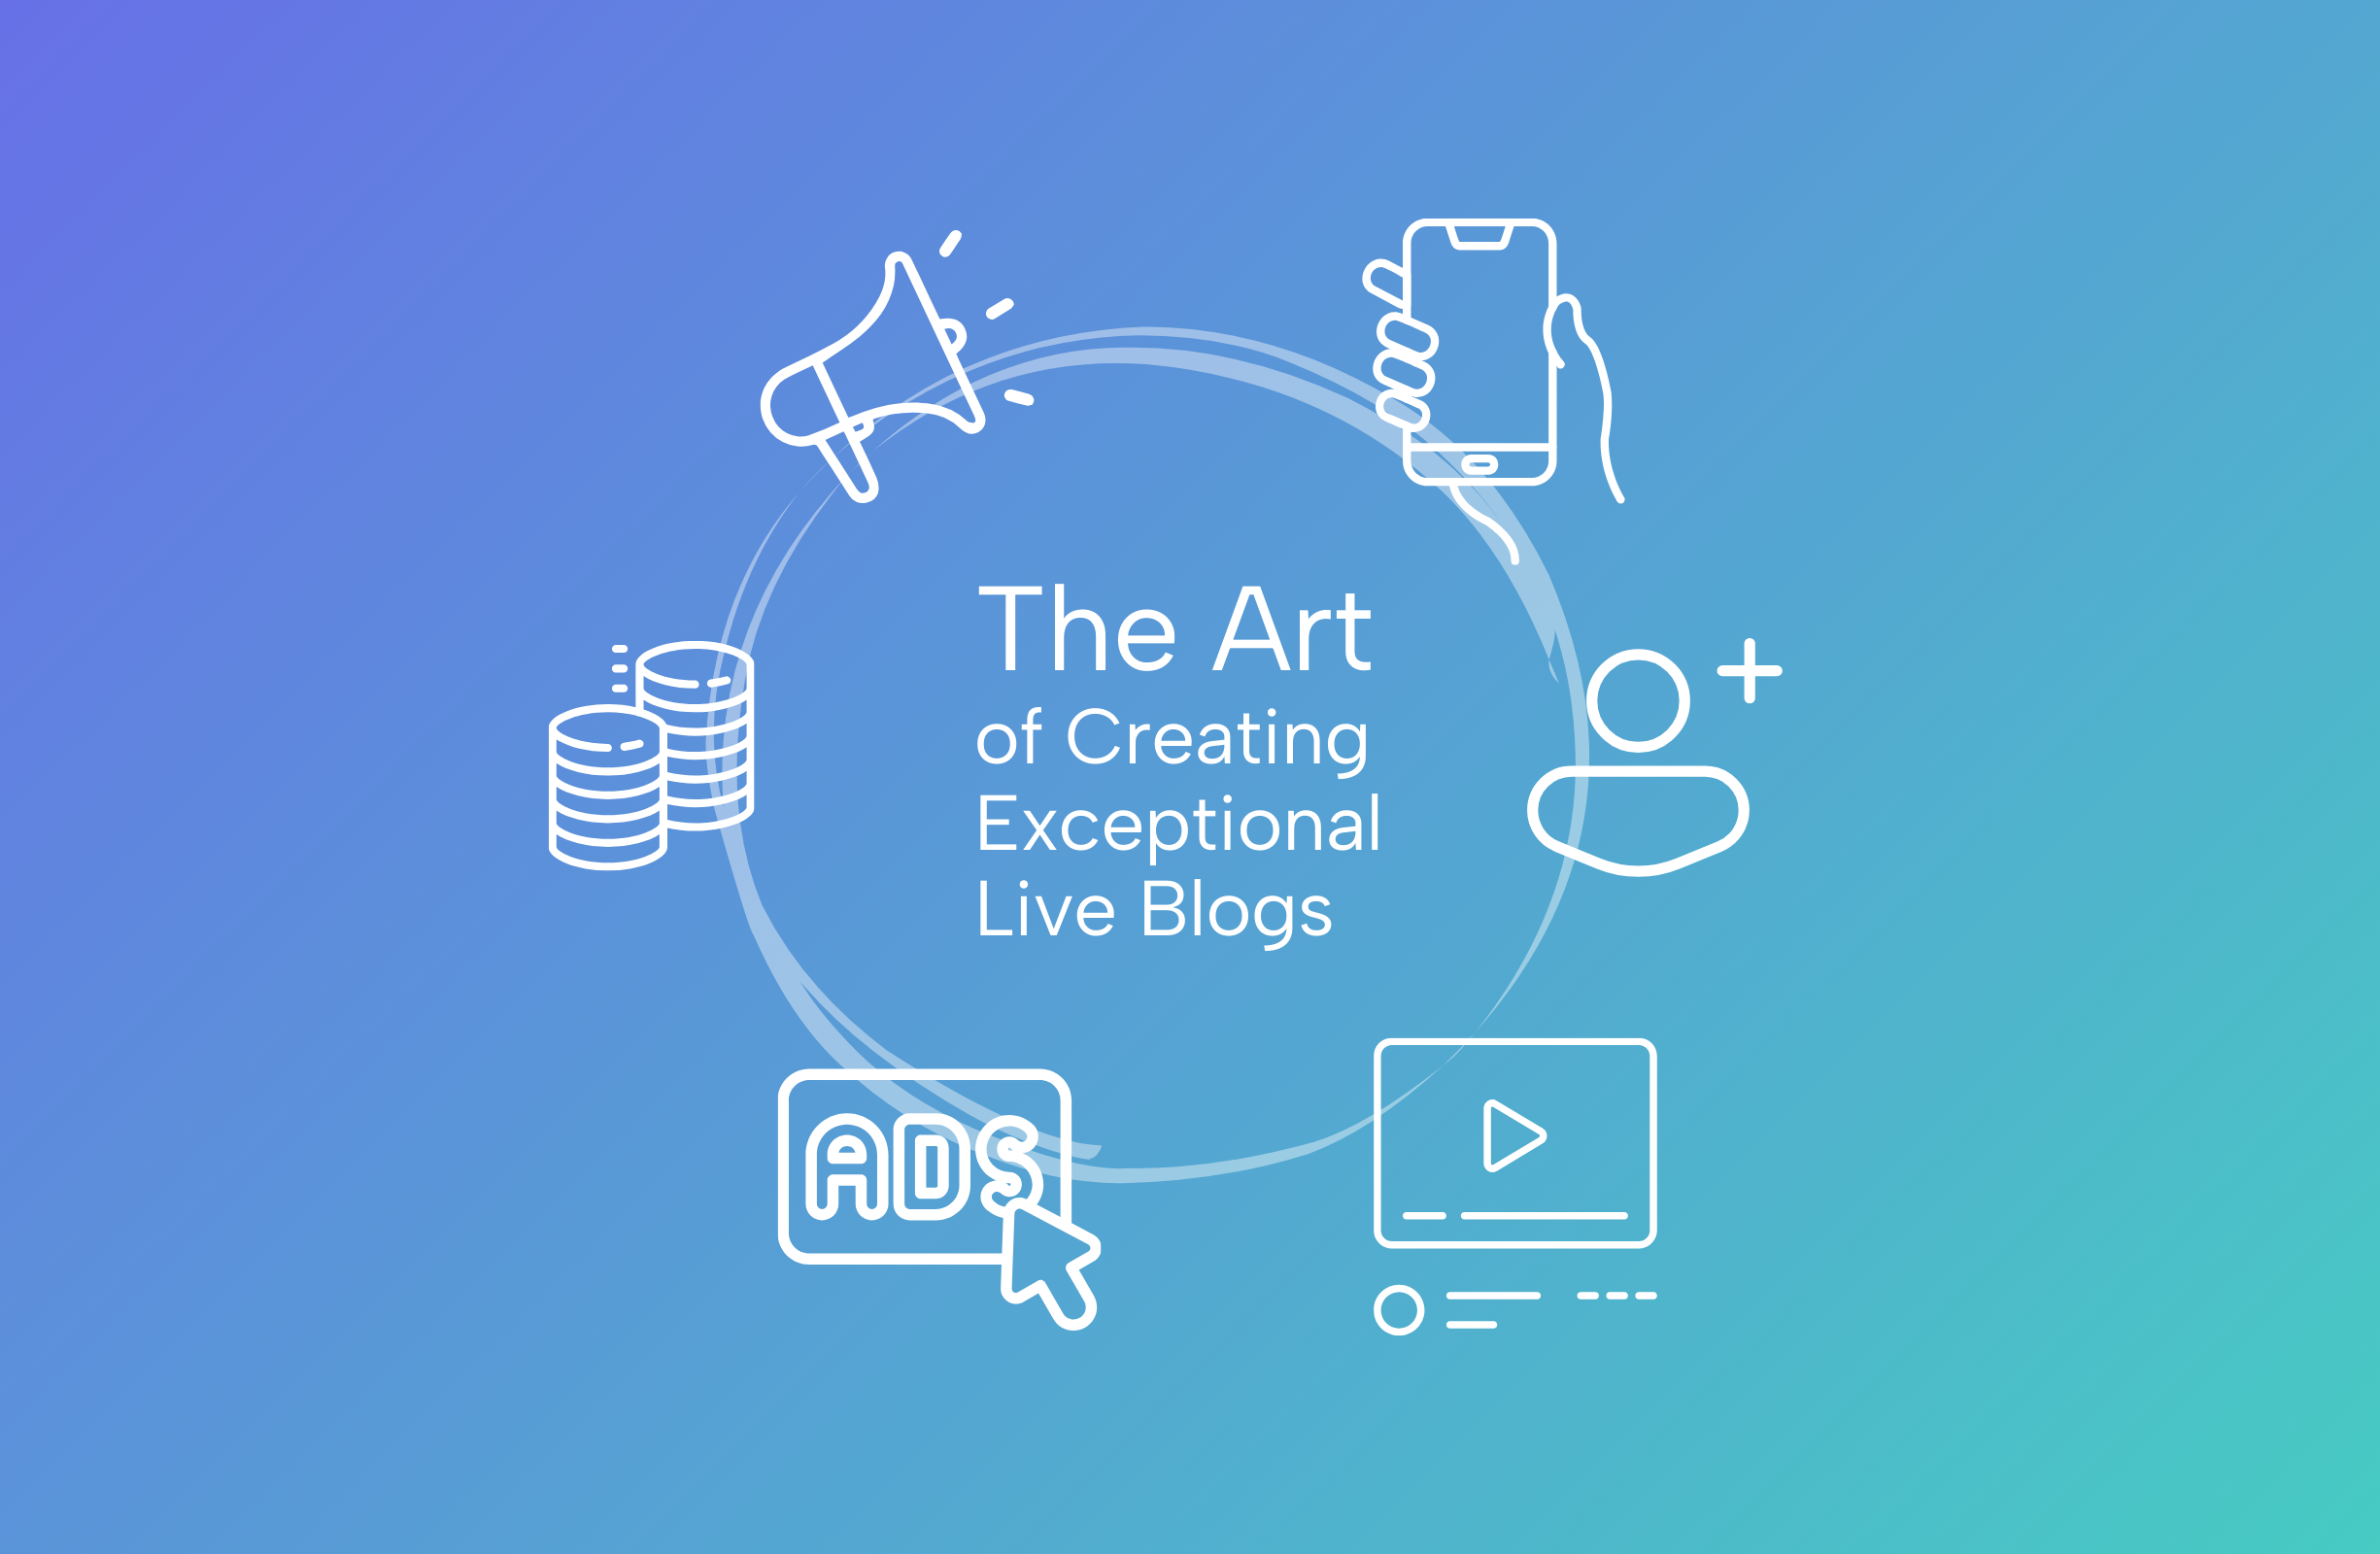 The Art of Creating Exceptional Live Blogs